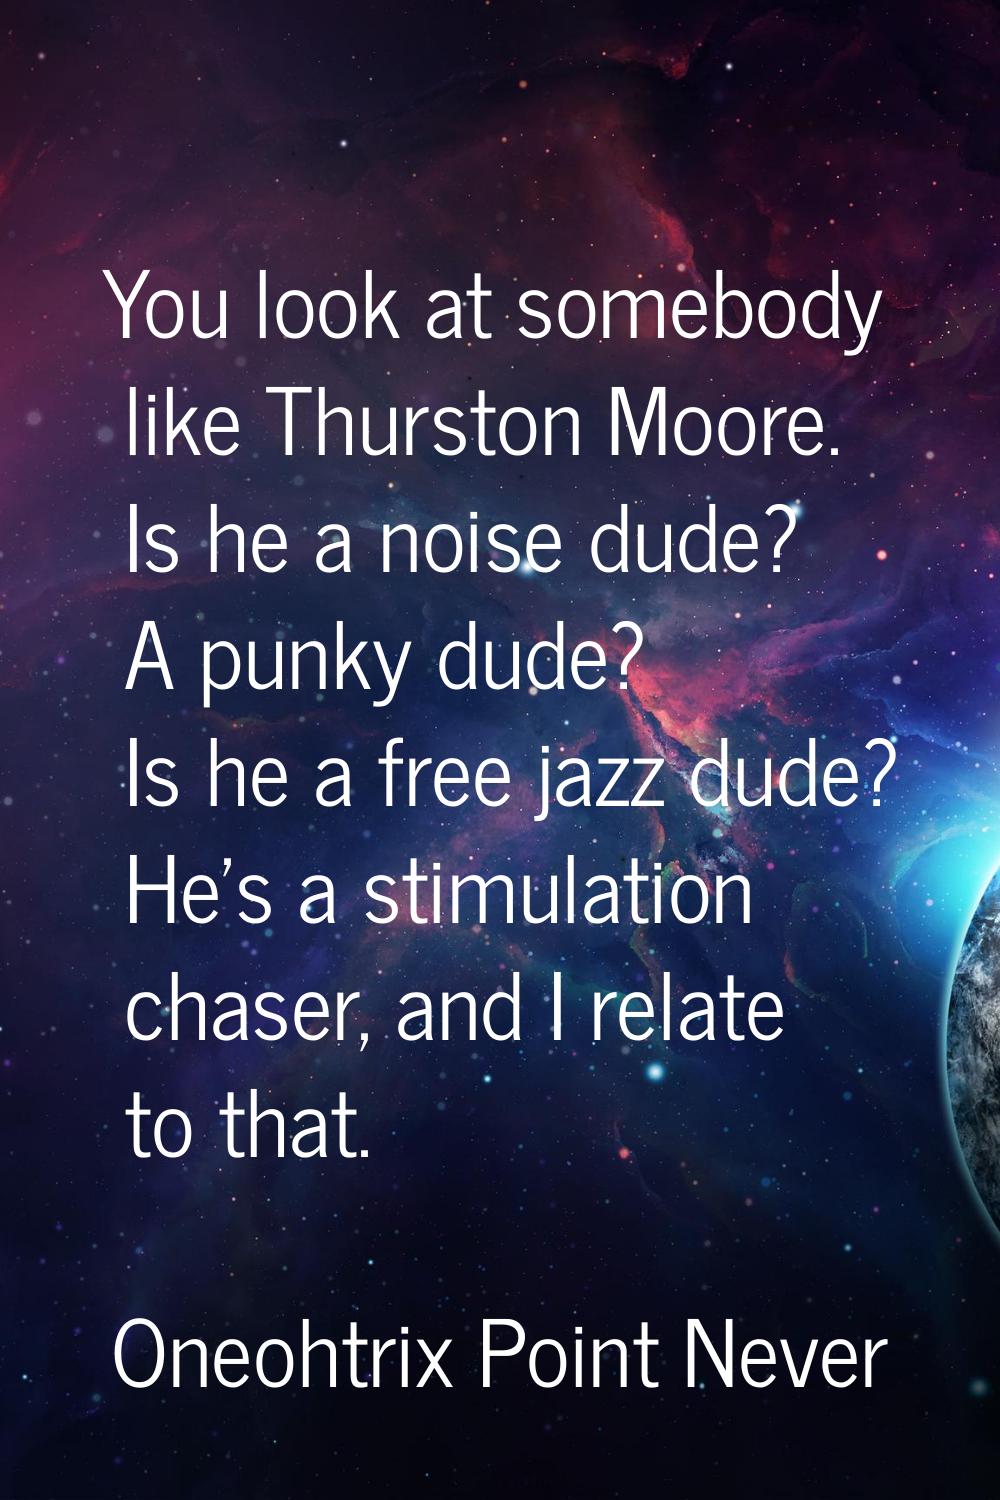 You look at somebody like Thurston Moore. Is he a noise dude? A punky dude? Is he a free jazz dude?